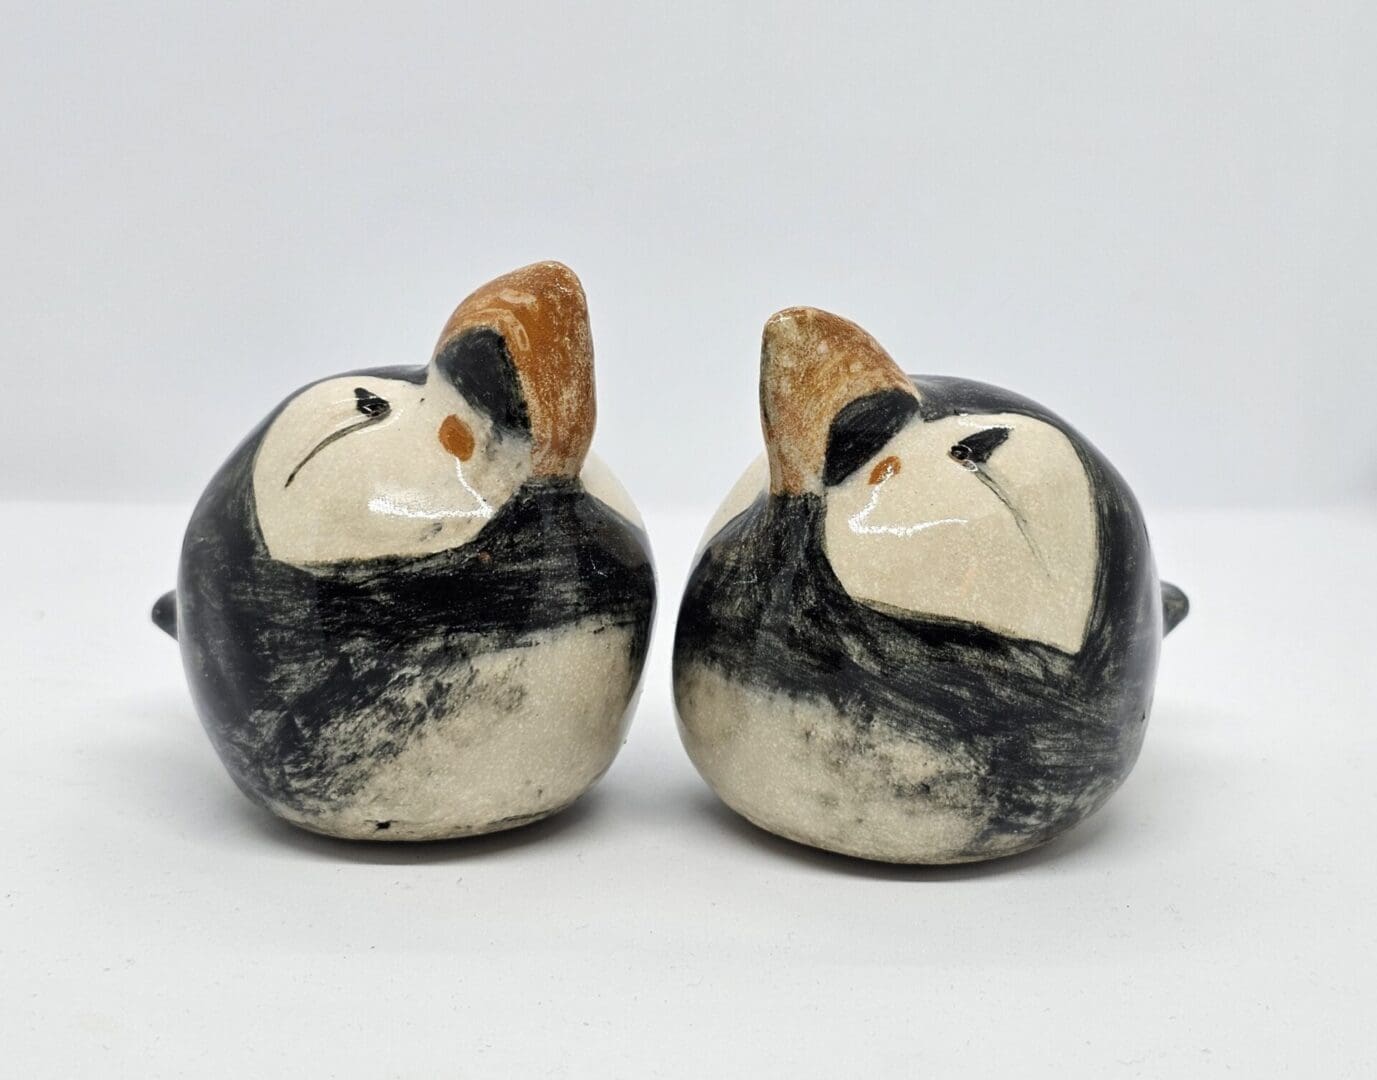 On a white background, 2 ceramic puffins sit nose to nose